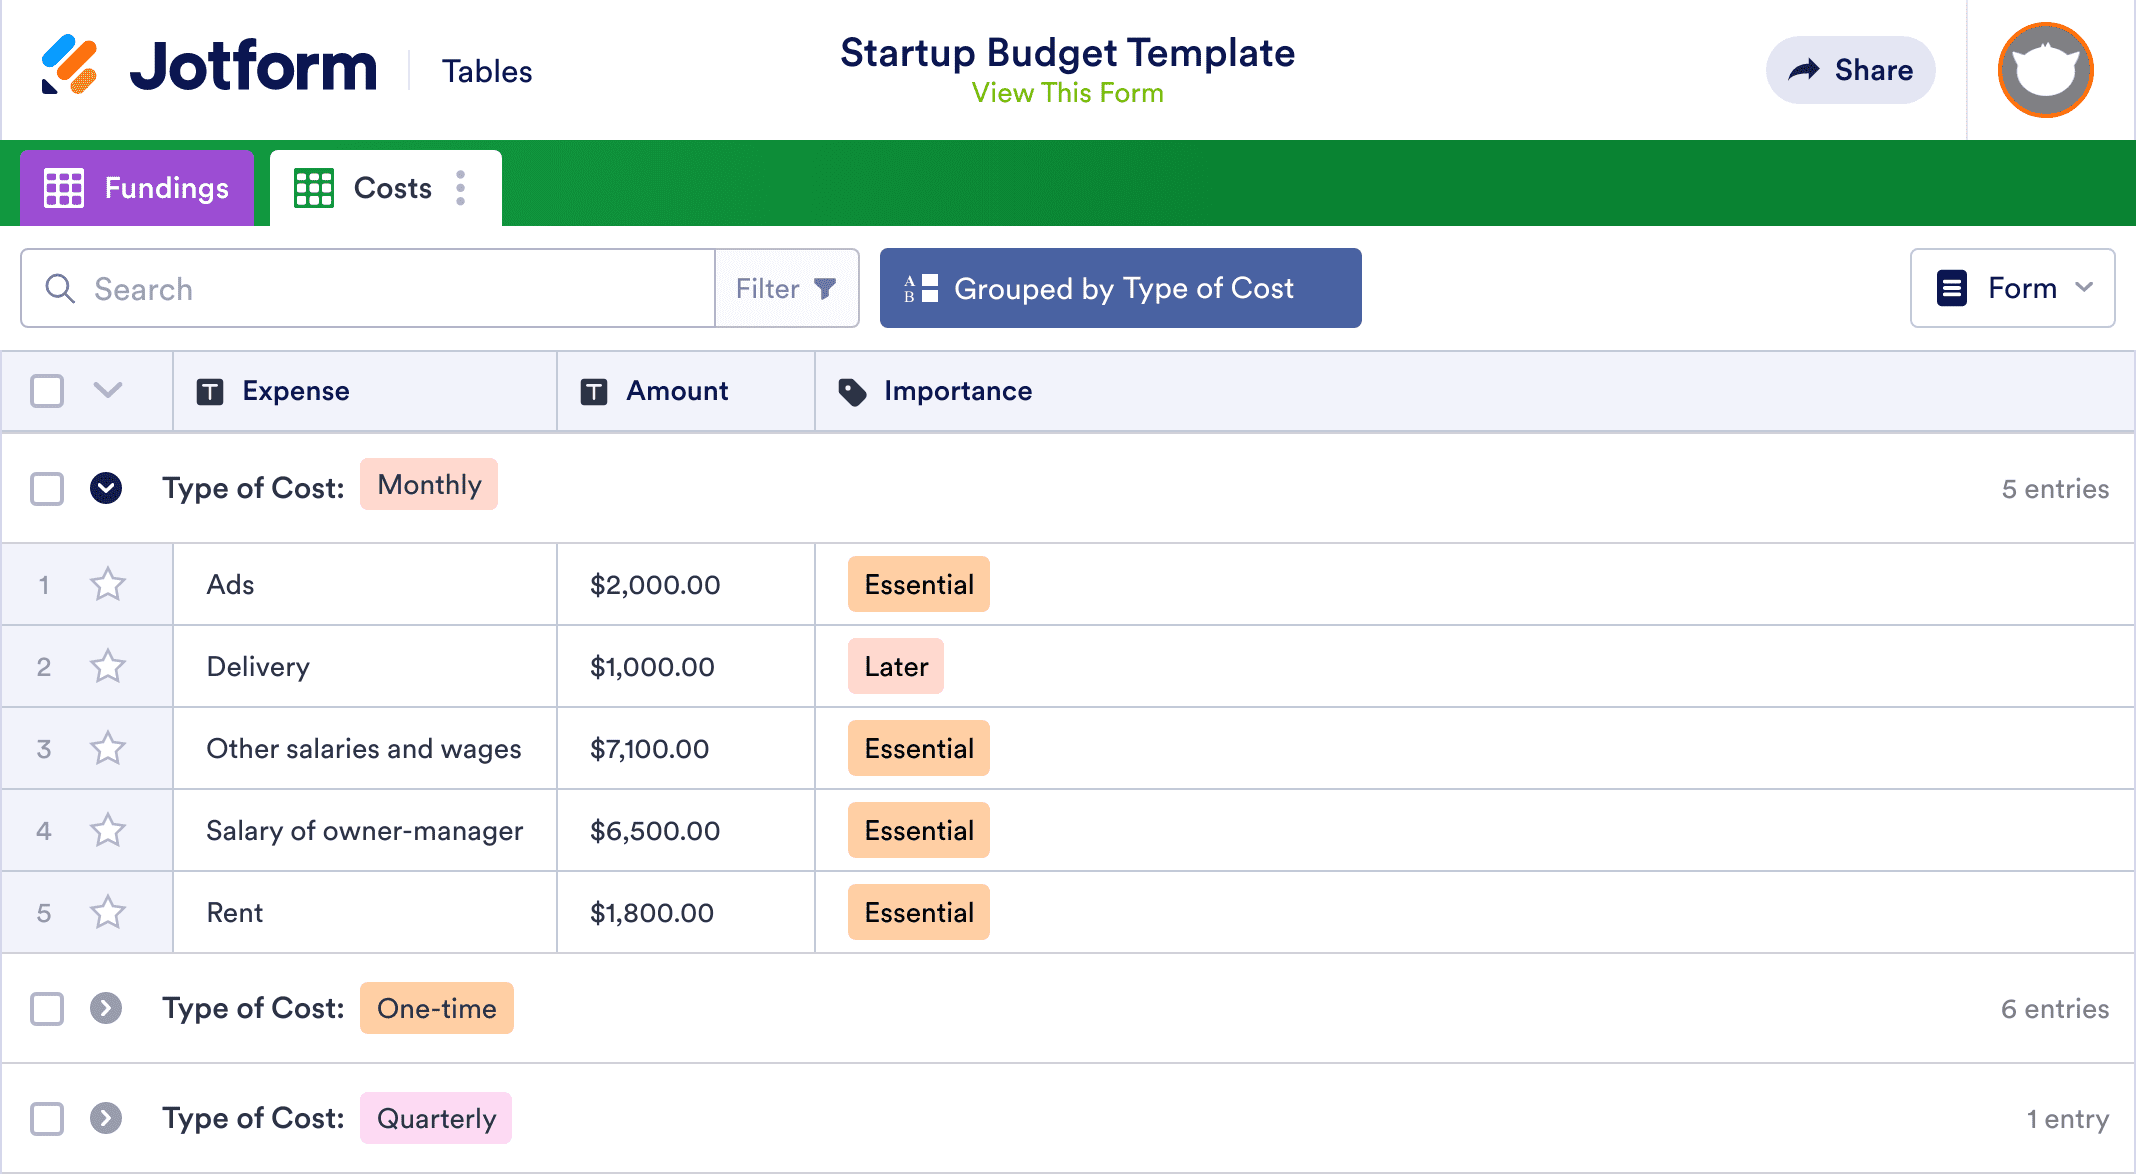 Startup Budget Template